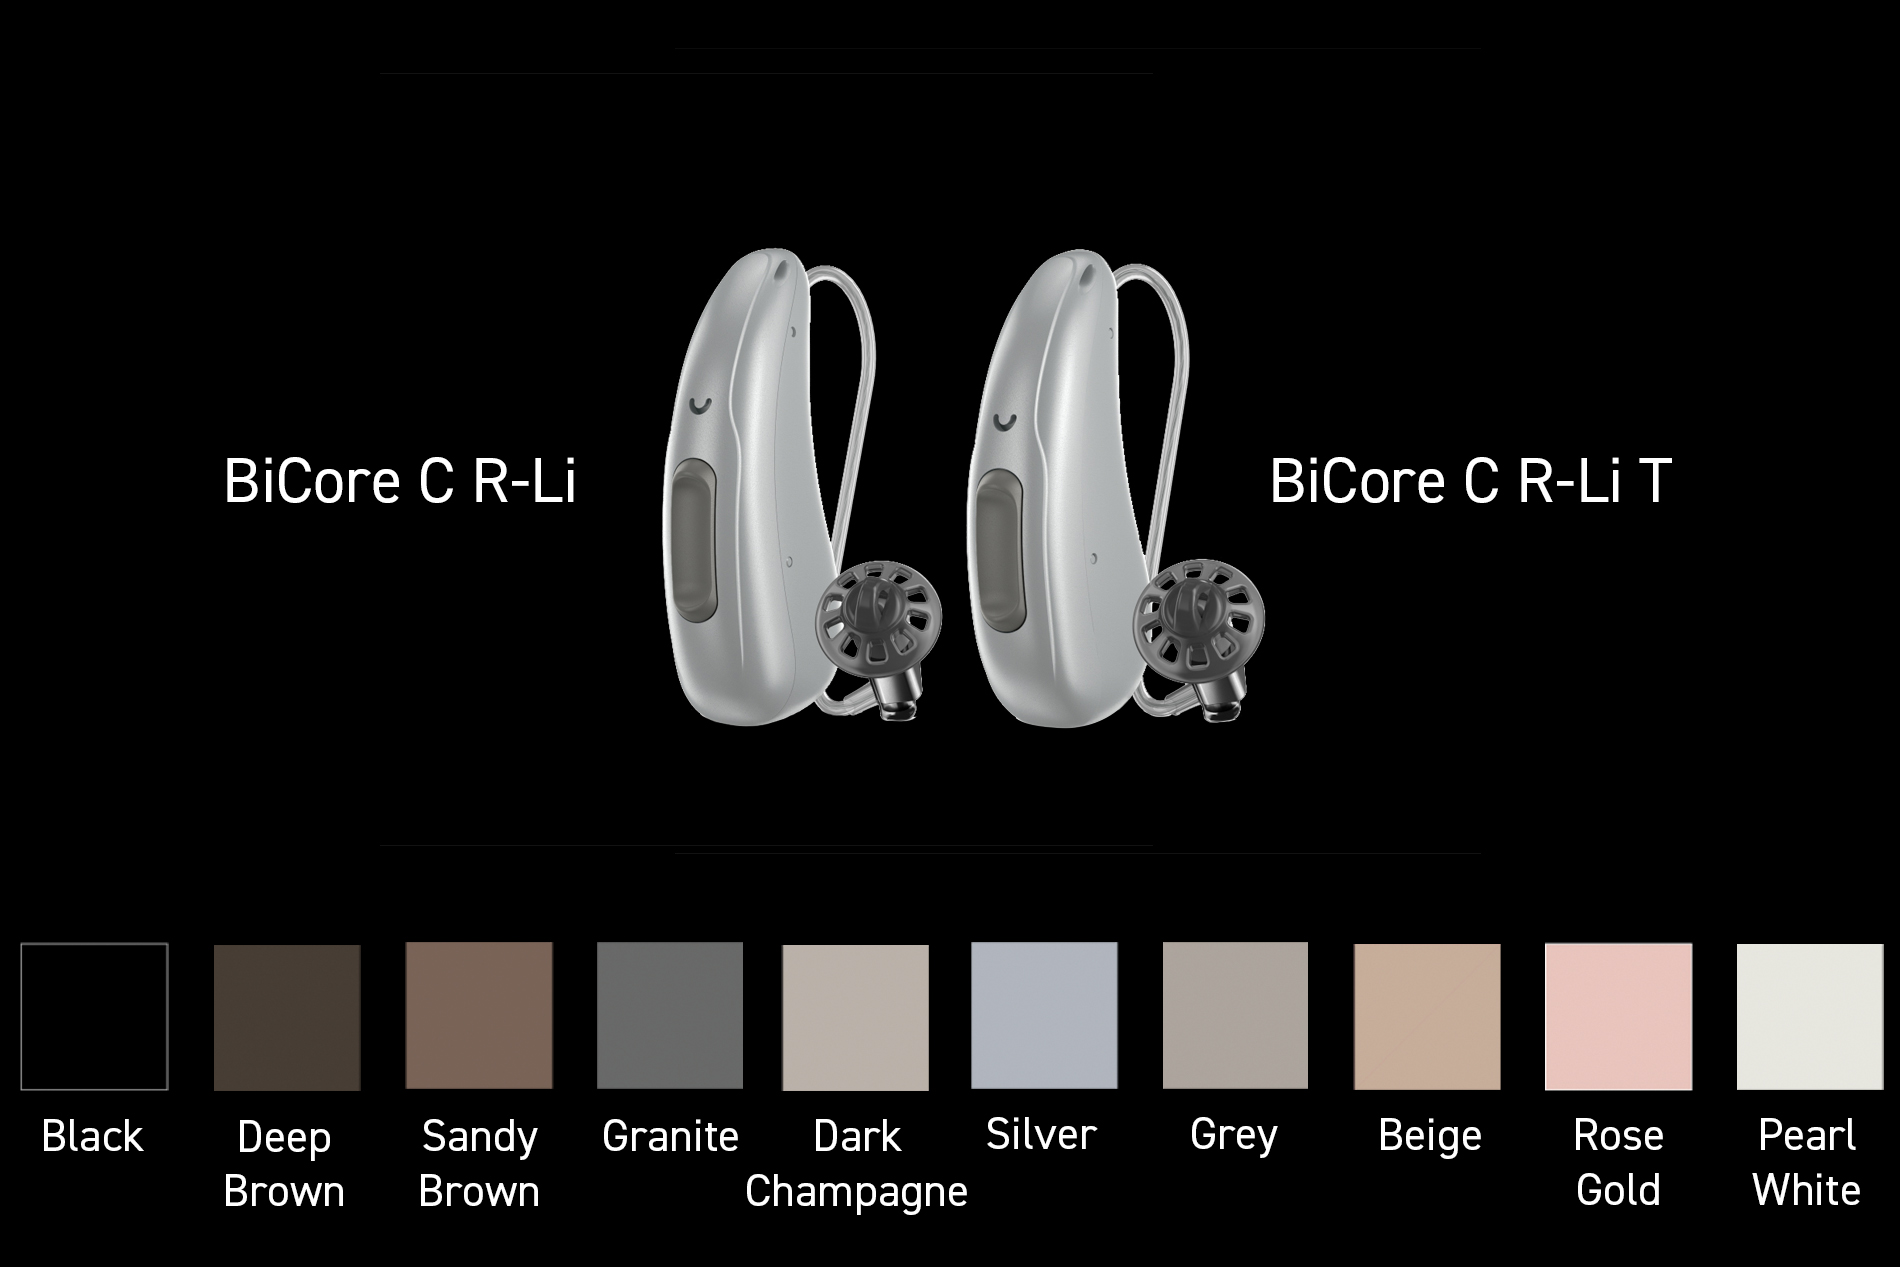 bicore ric hearing aids and color options